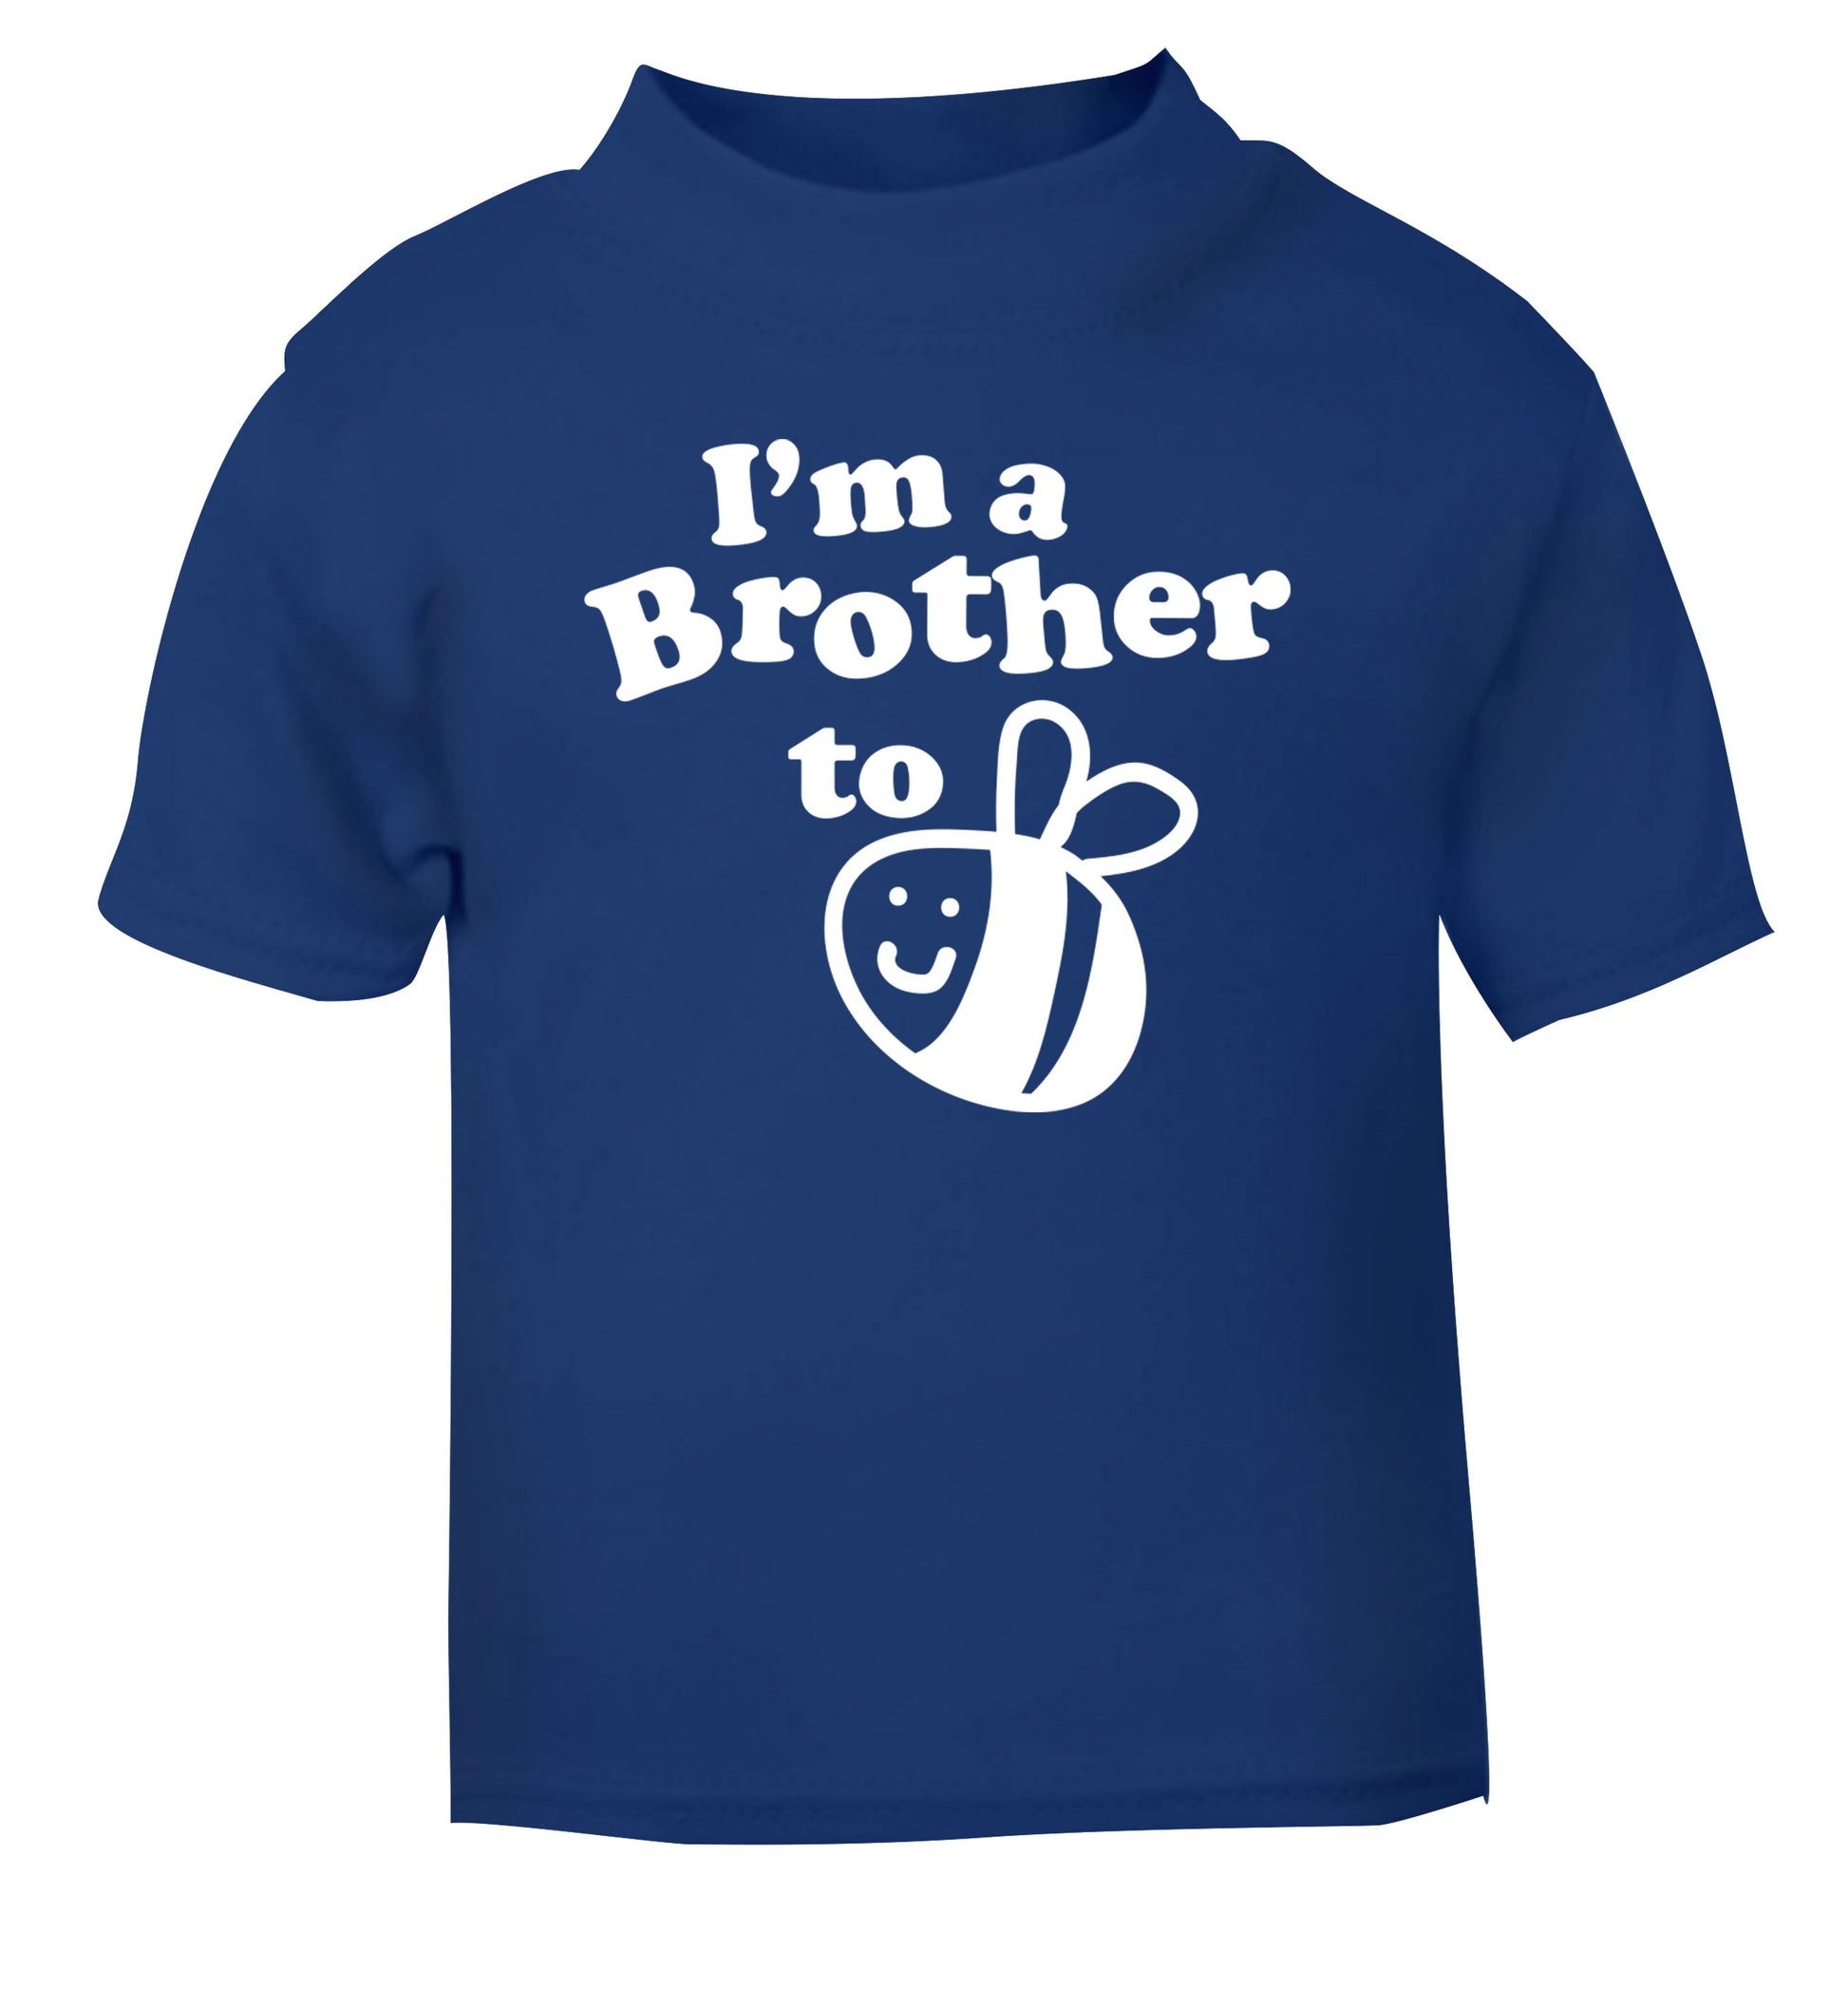 I'm a brother to be blue Baby Toddler Tshirt 2 Years